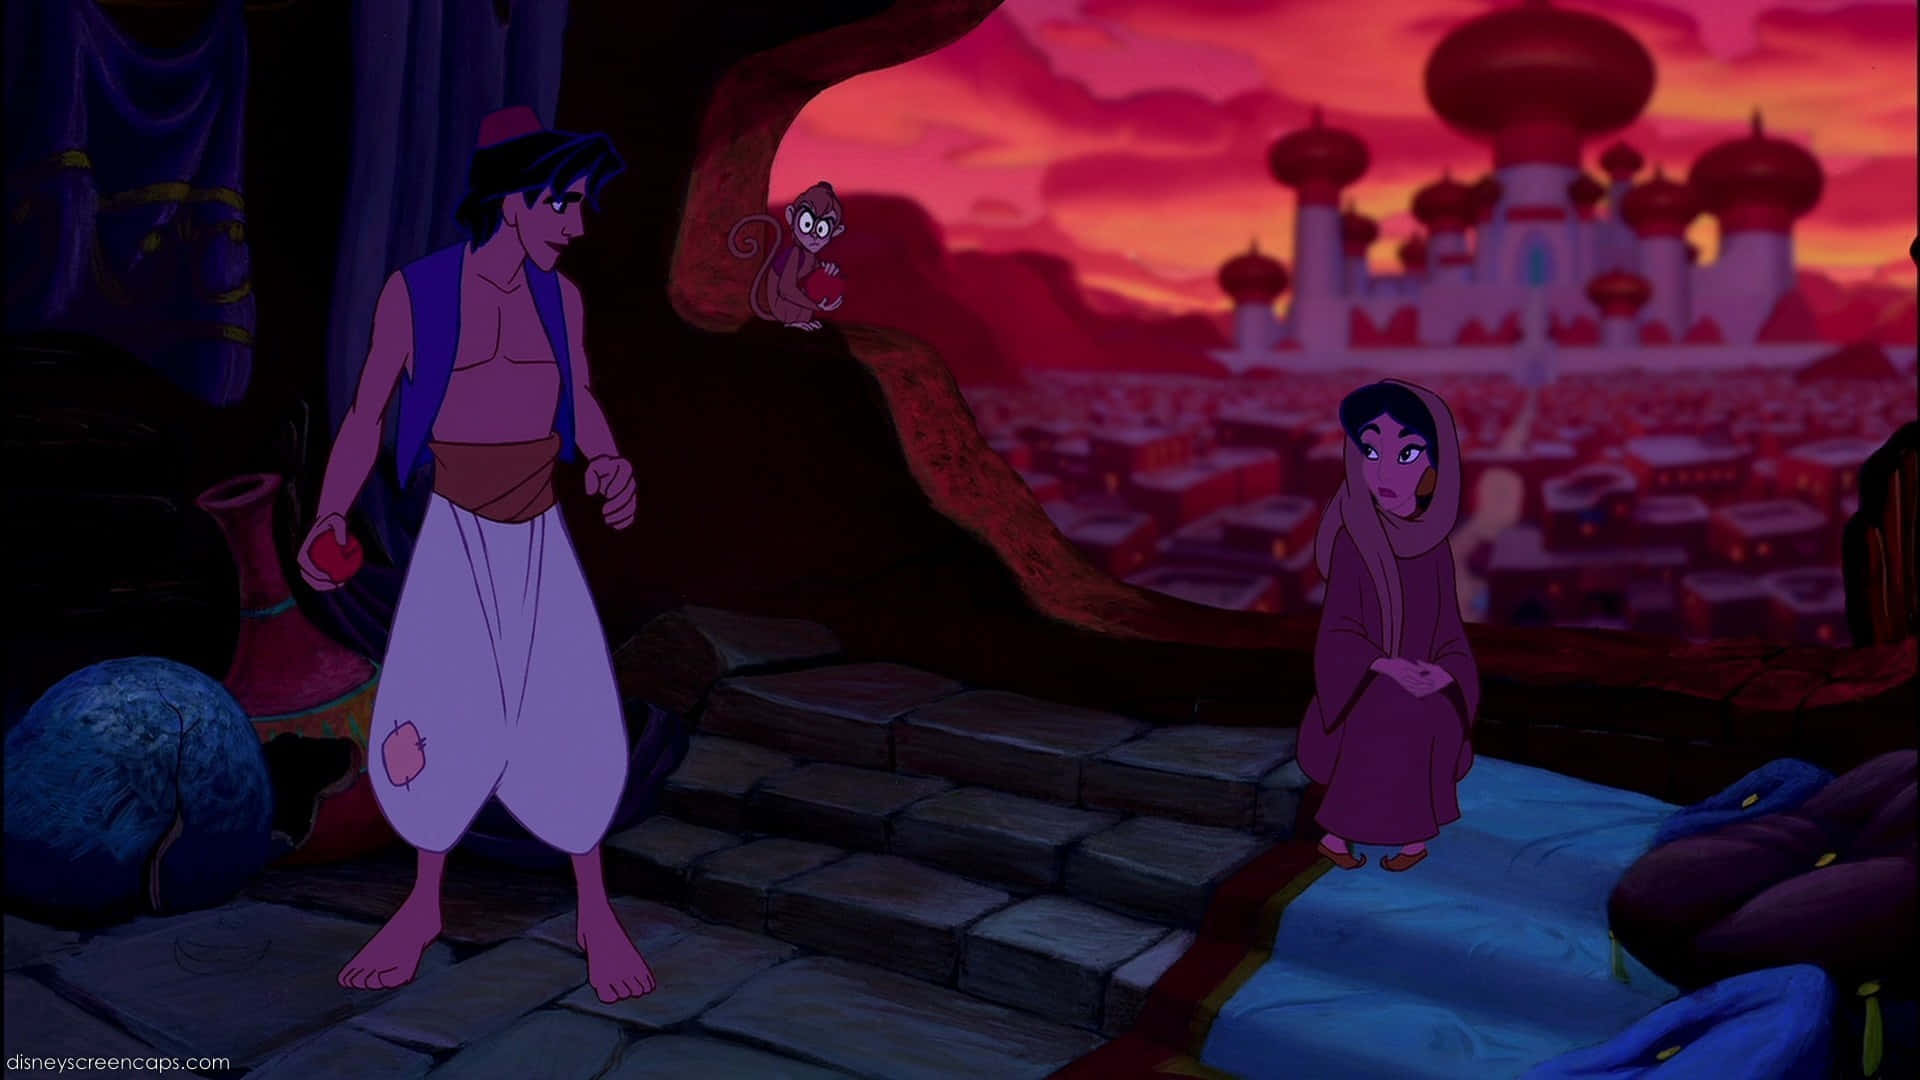 Genie Reveals the Magic of Agrabah